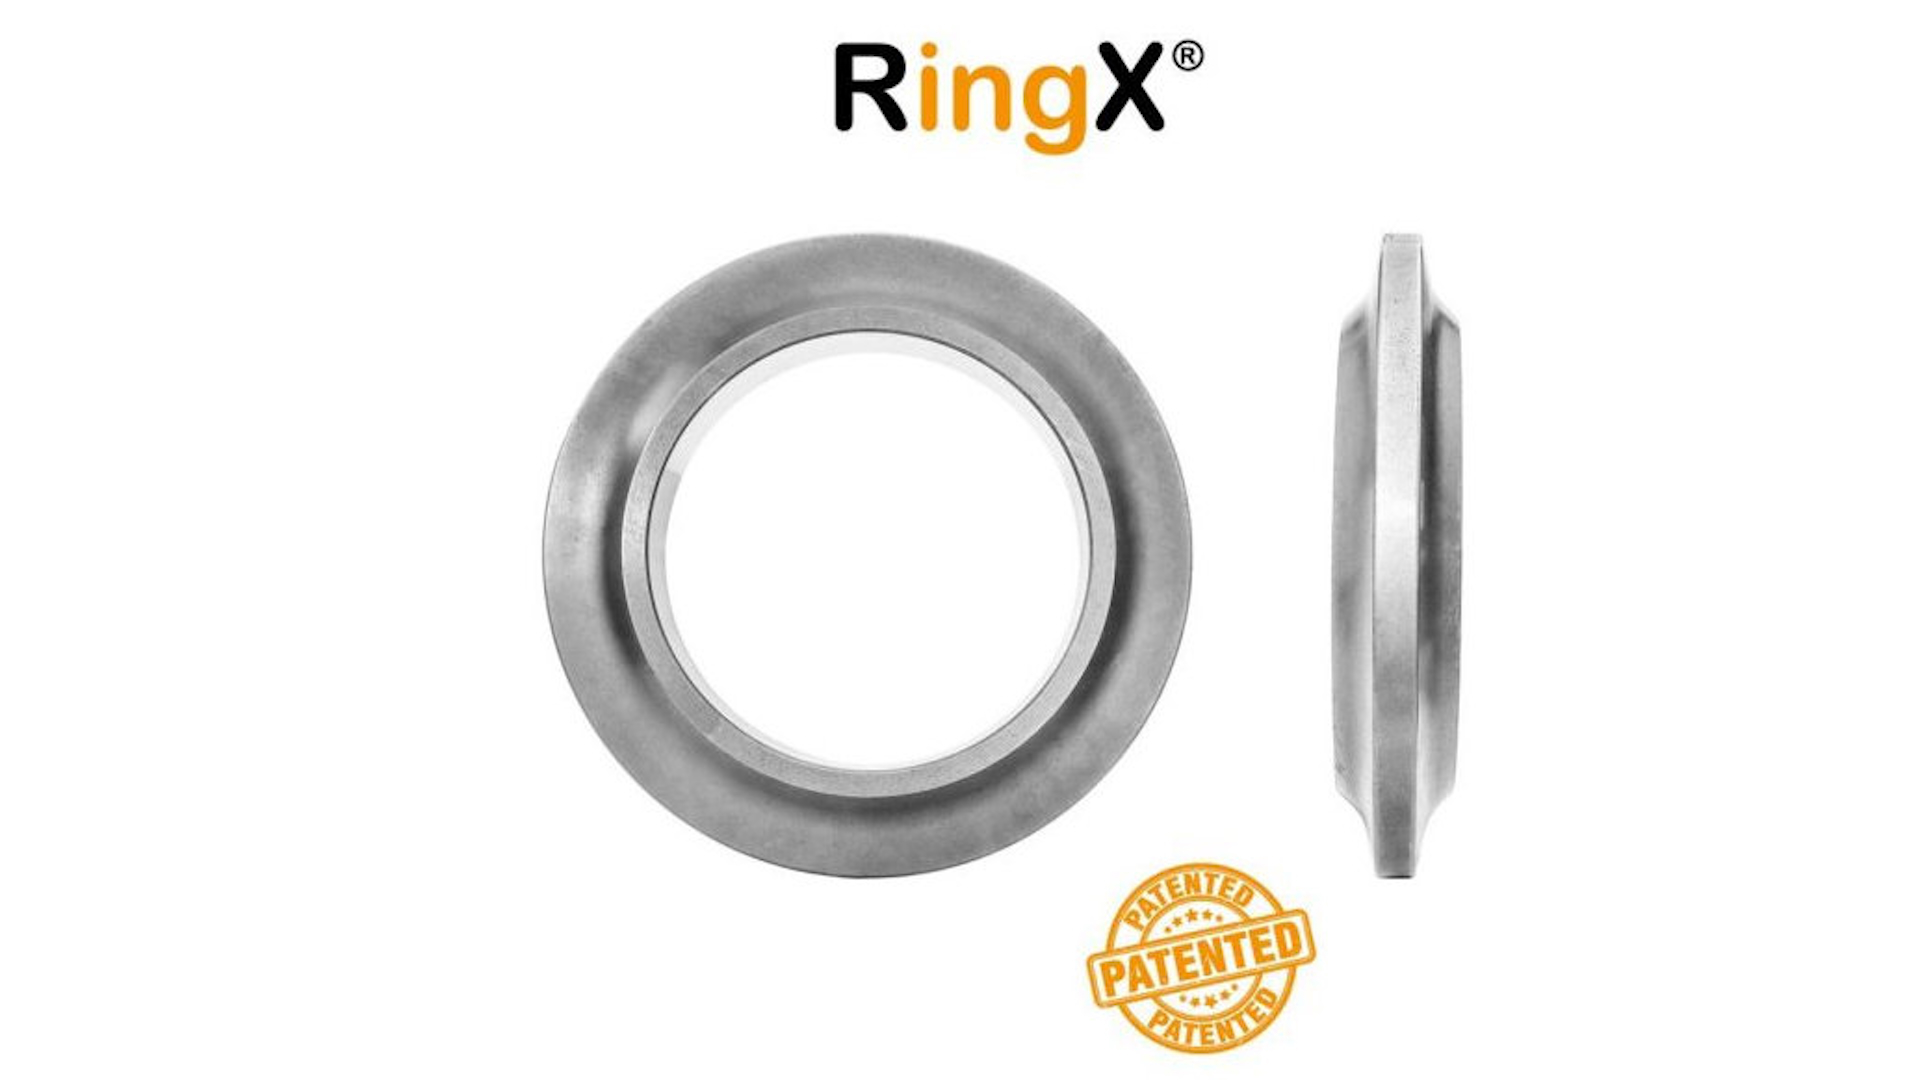 TBM cutters RingX ® : anatomy of a great product